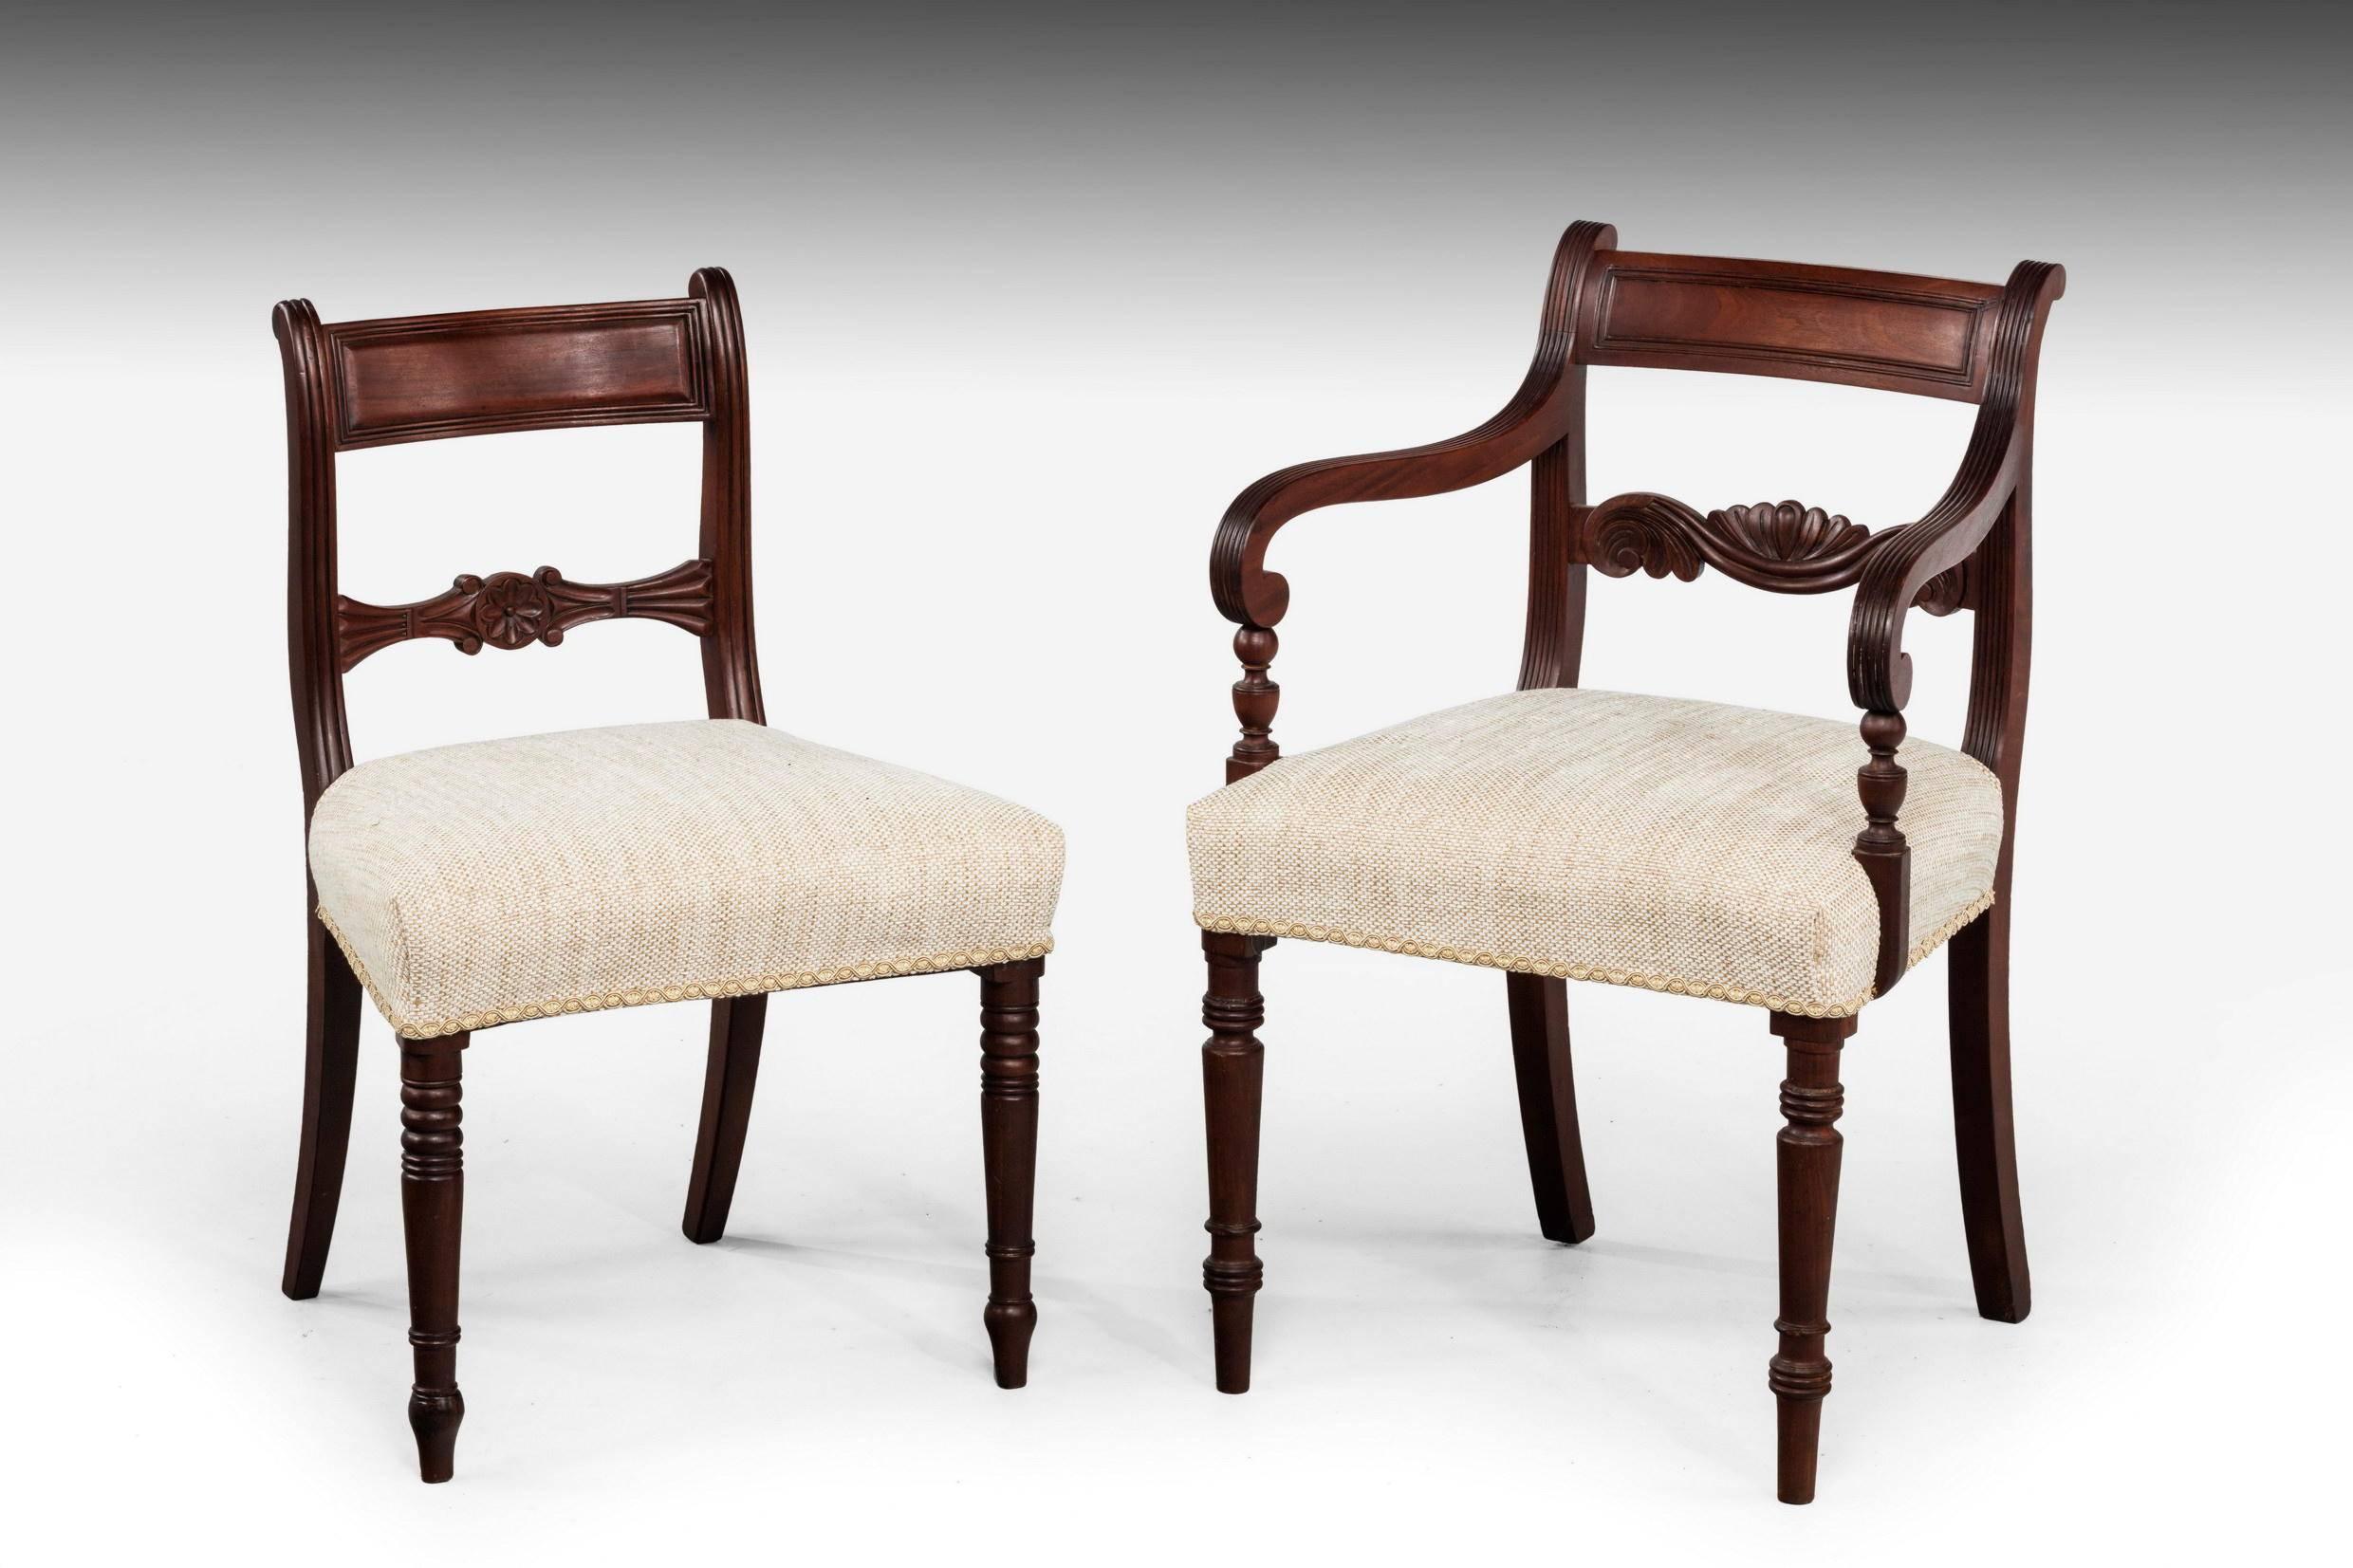 A good and original set of eight (six plus two) Regency period mahogany framed chairs. The arms continuously reeded. On tapering turned supports. The back central splat finely carved with scrolls.

Measures: Single chairs (inches):

height